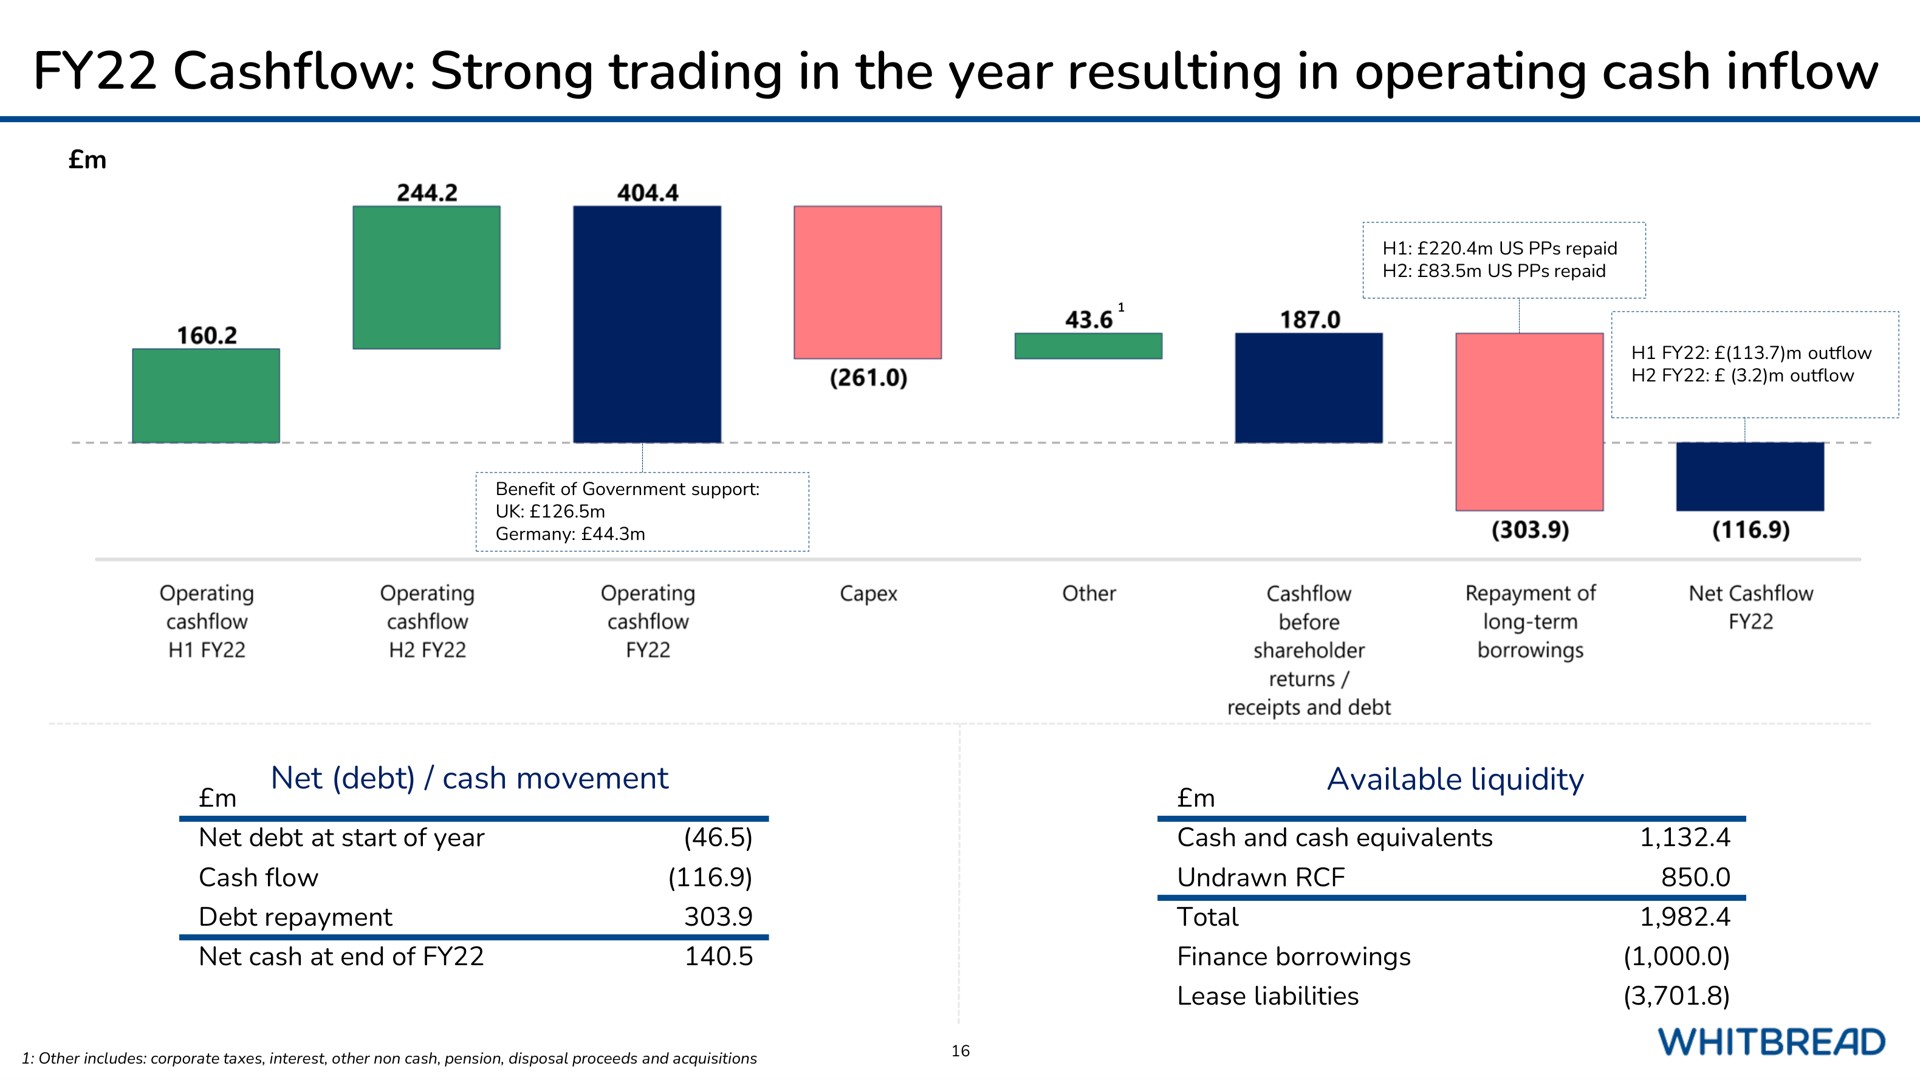 strong trading in the year resulting in operating cash inflow net debt at | Whitebread